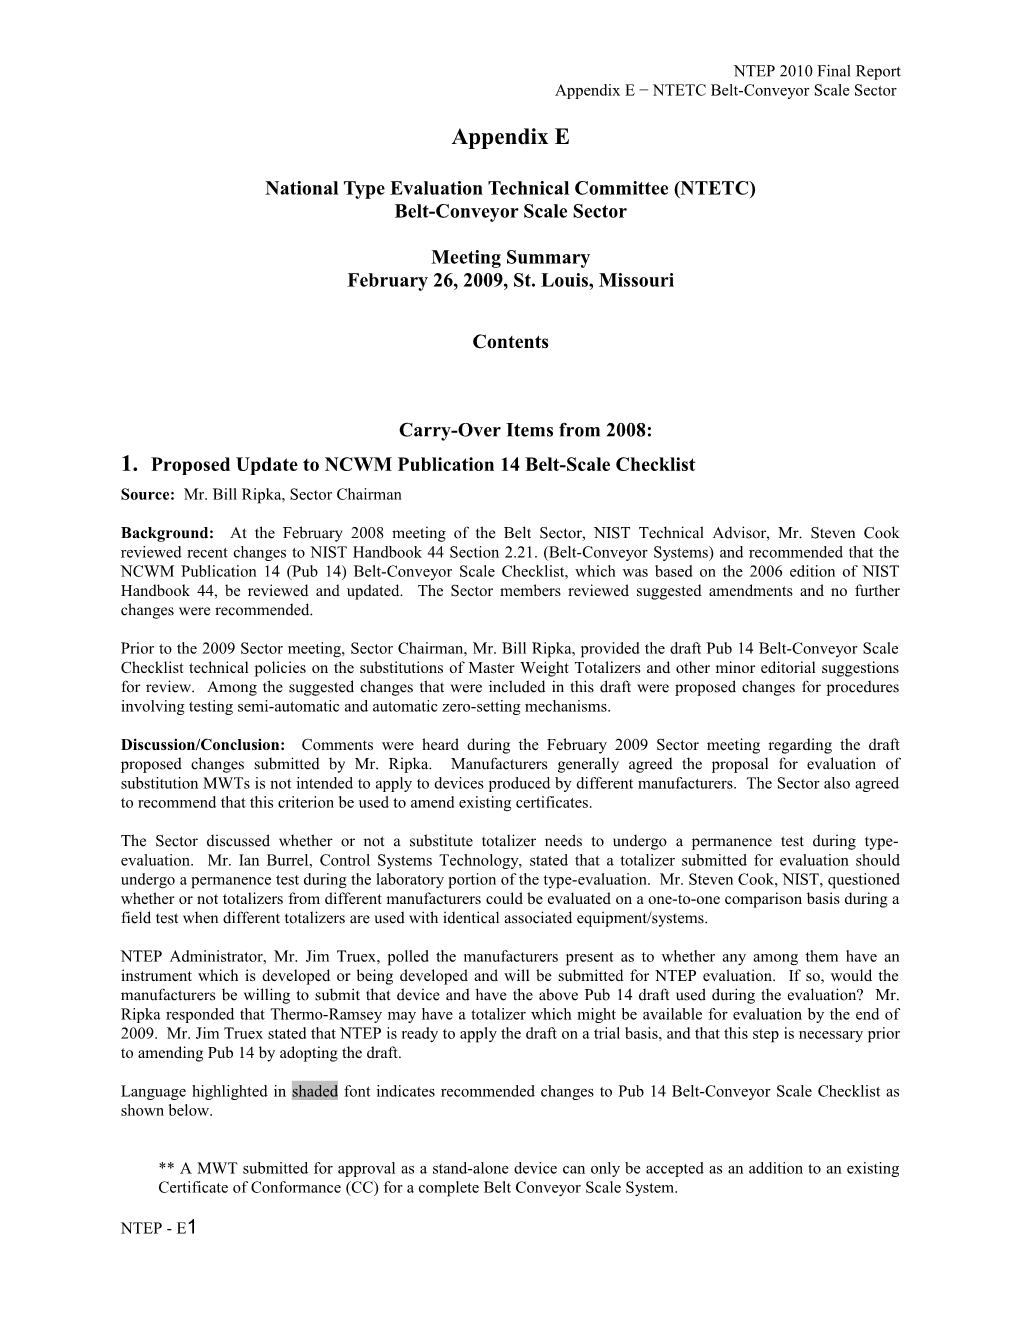 National Type Evaluation Technical Committee (NTETC)